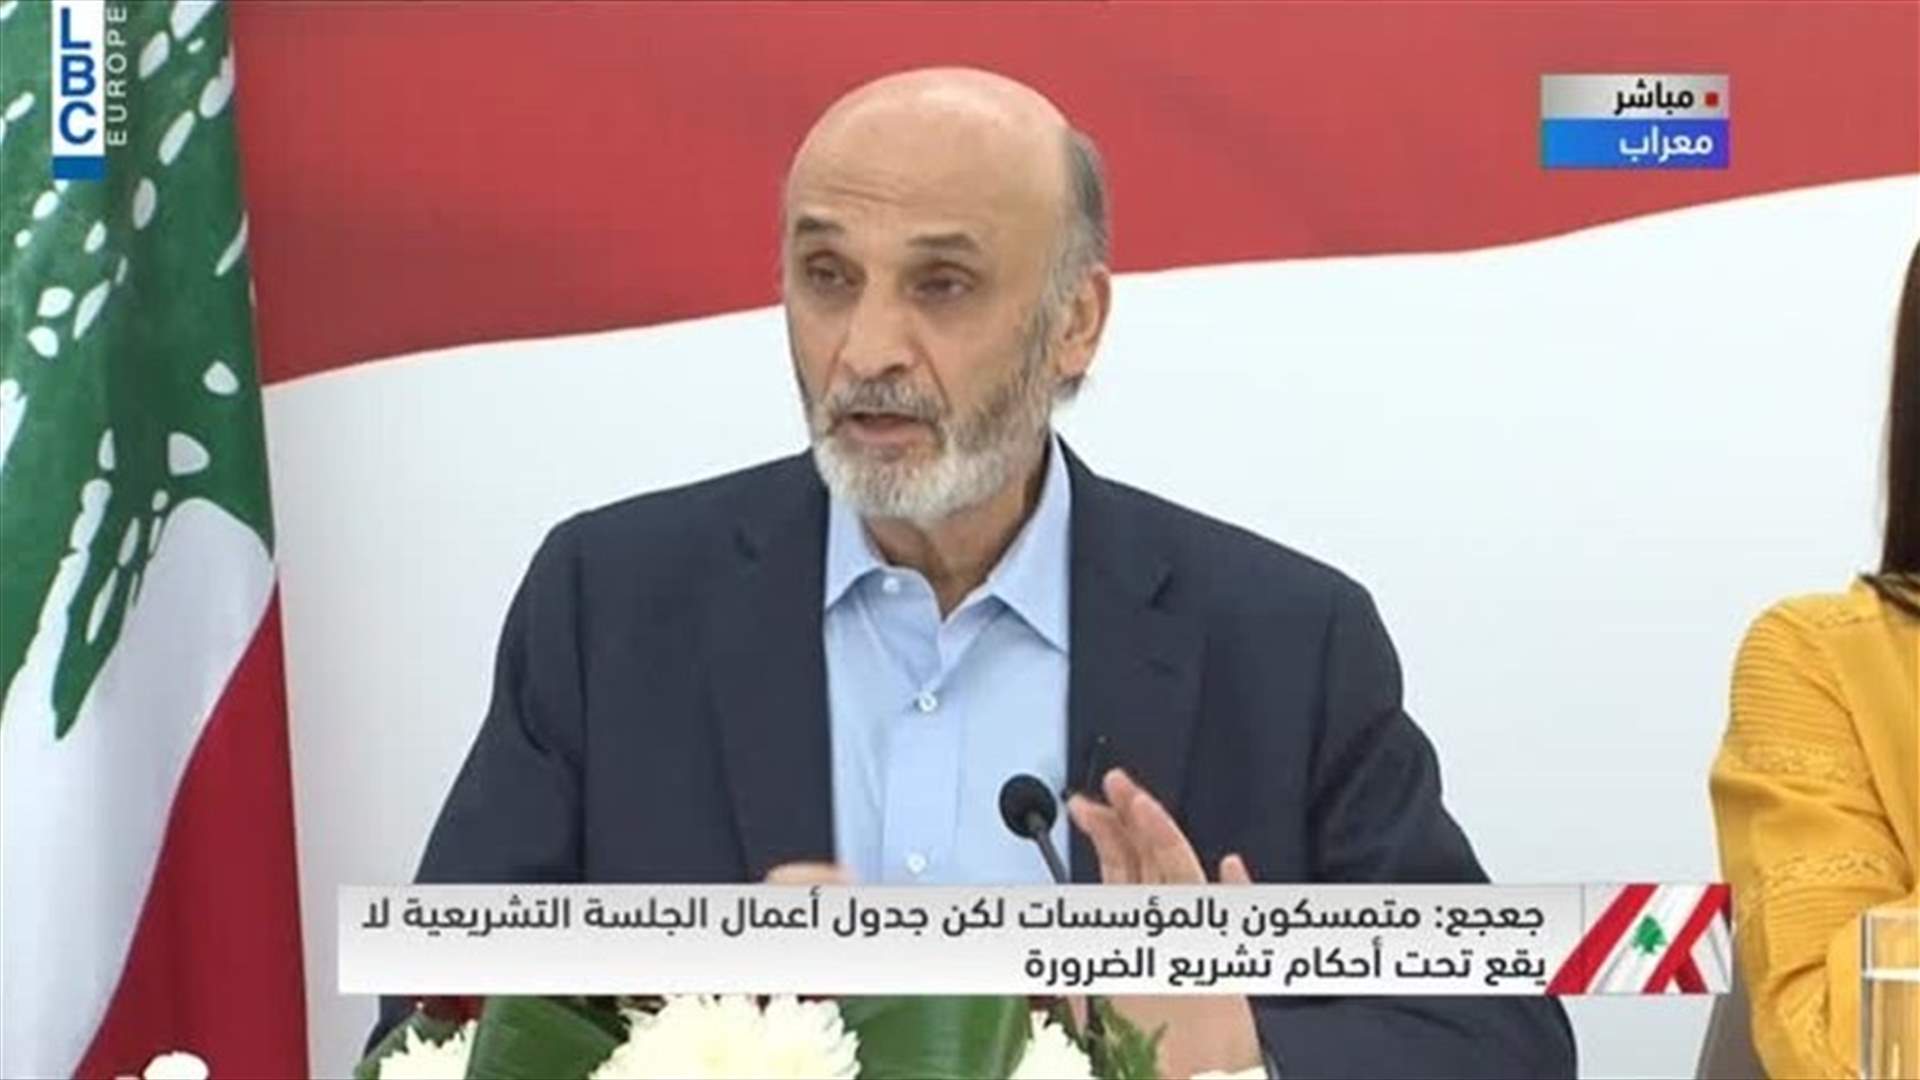 Geagea: We will not partake in tomorrow’s session